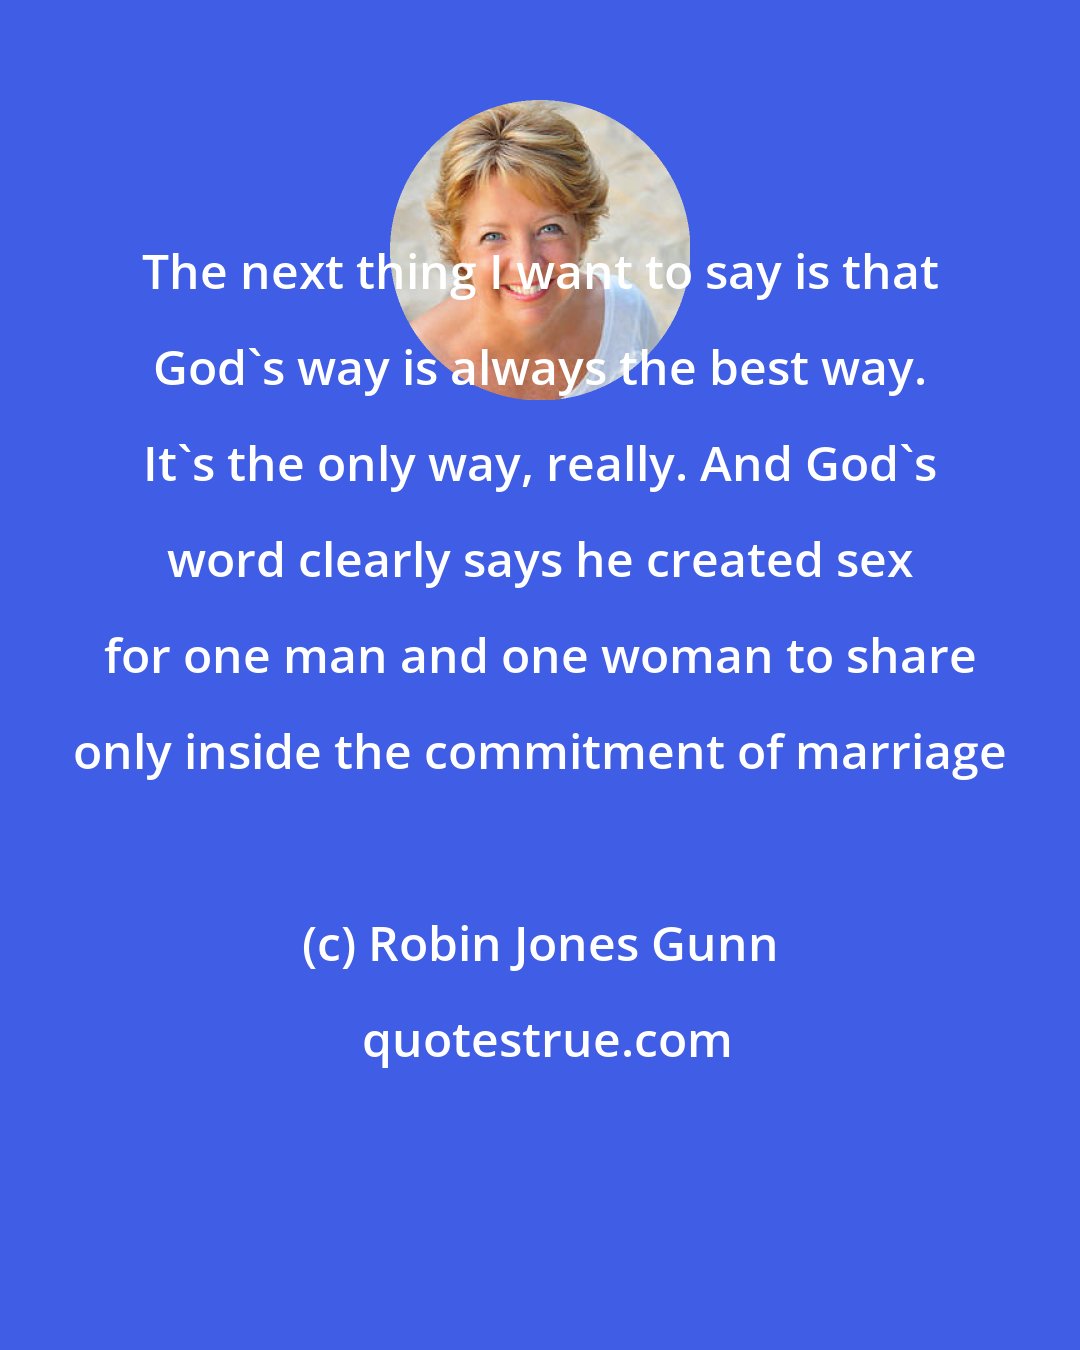 Robin Jones Gunn: The next thing I want to say is that God's way is always the best way. It's the only way, really. And God's word clearly says he created sex for one man and one woman to share only inside the commitment of marriage